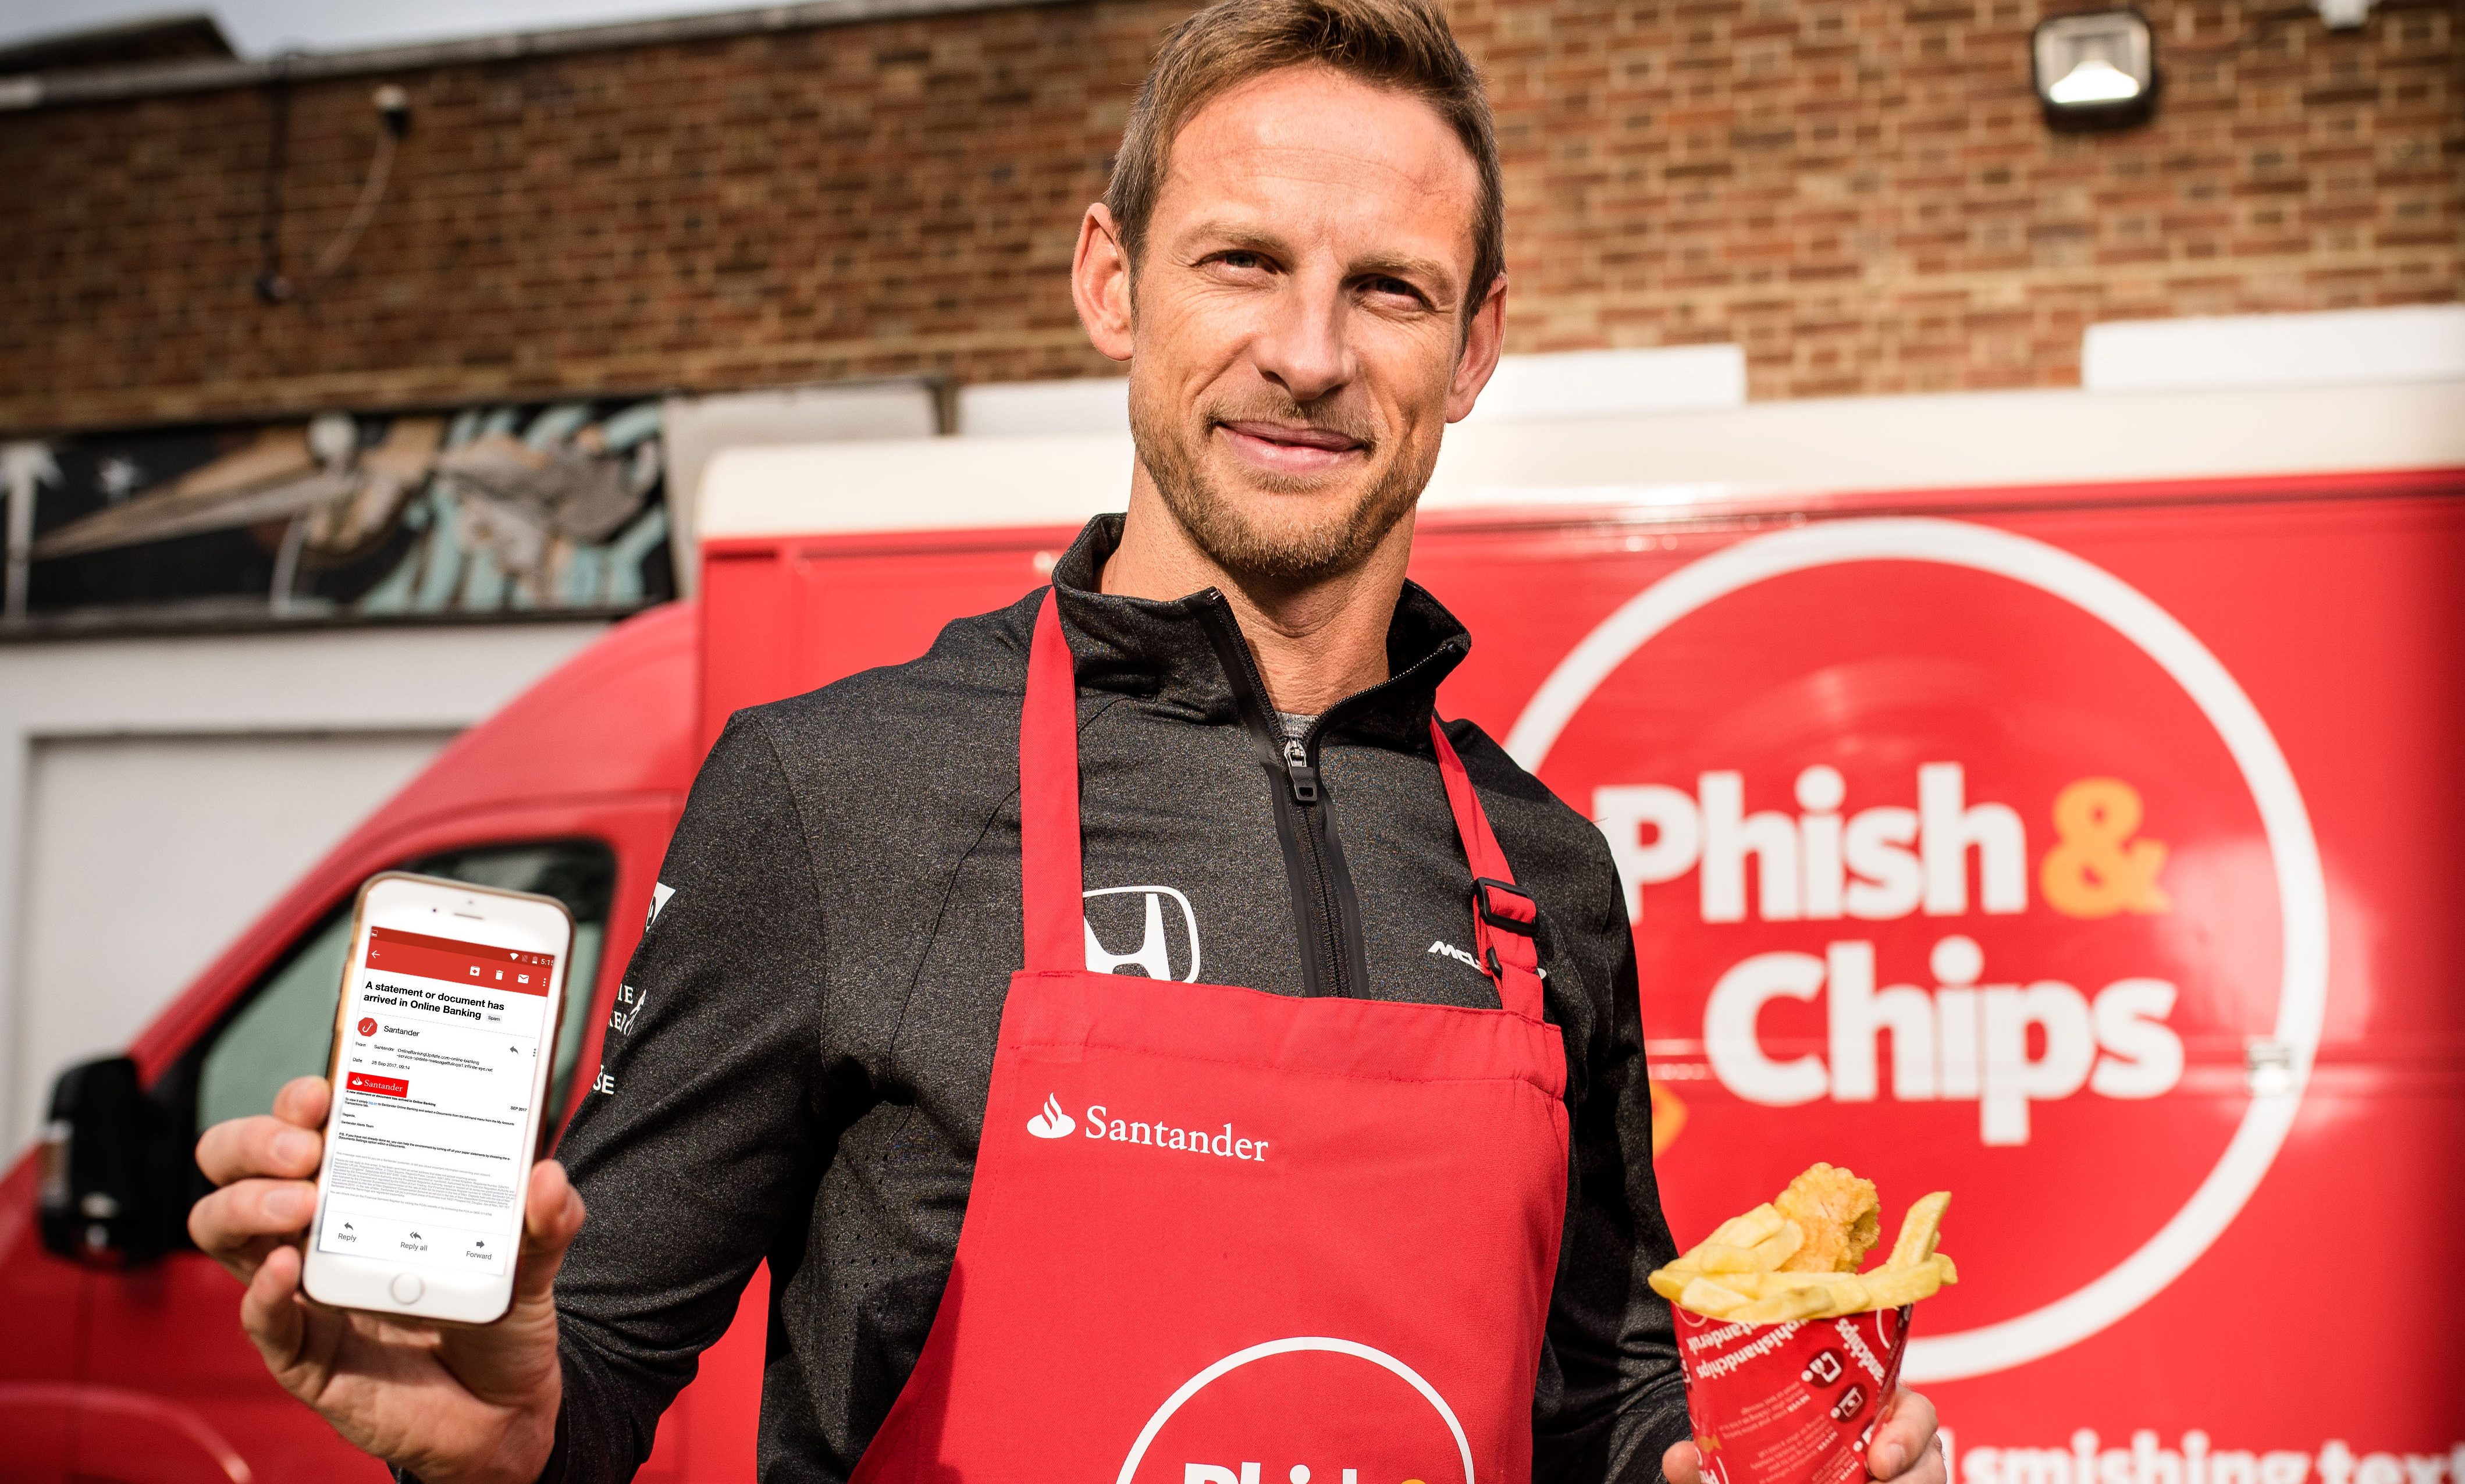 Jenson Button stands outside Santander’s Phish & Chip van where he has been serving fish and chips to the public in exchange for phishing emails and smishing texts (John Nguyen/Santander)